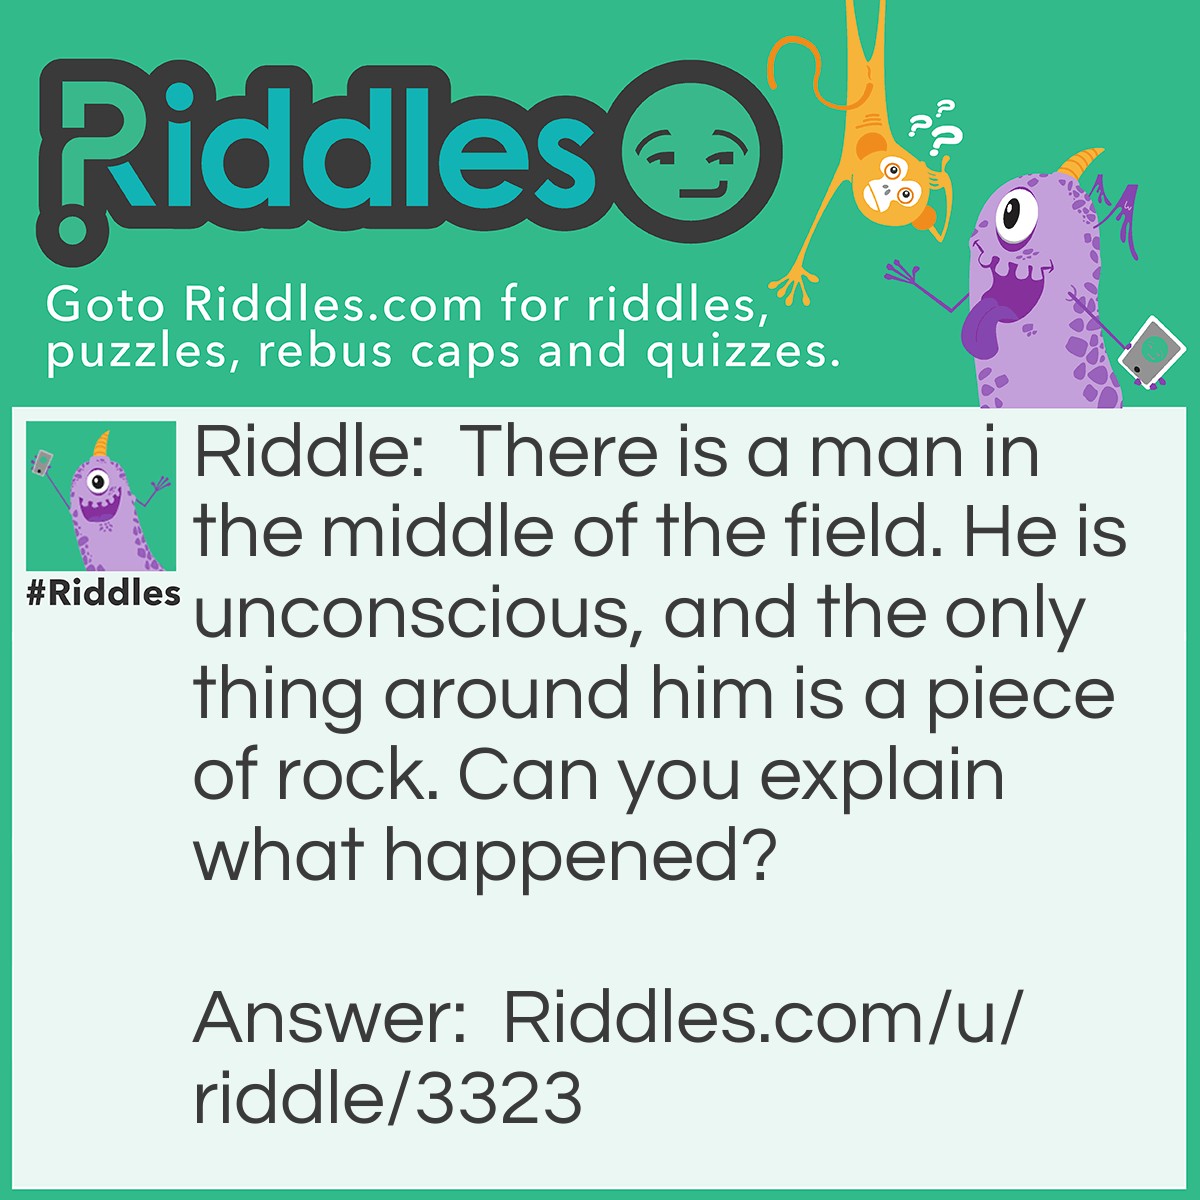 Riddle: There is a man in the middle of the field. He is unconscious, and the only thing around him is a piece of rock. Can you explain what happened? Answer: The man was Superman, and the piece of rock was Kryptonite.